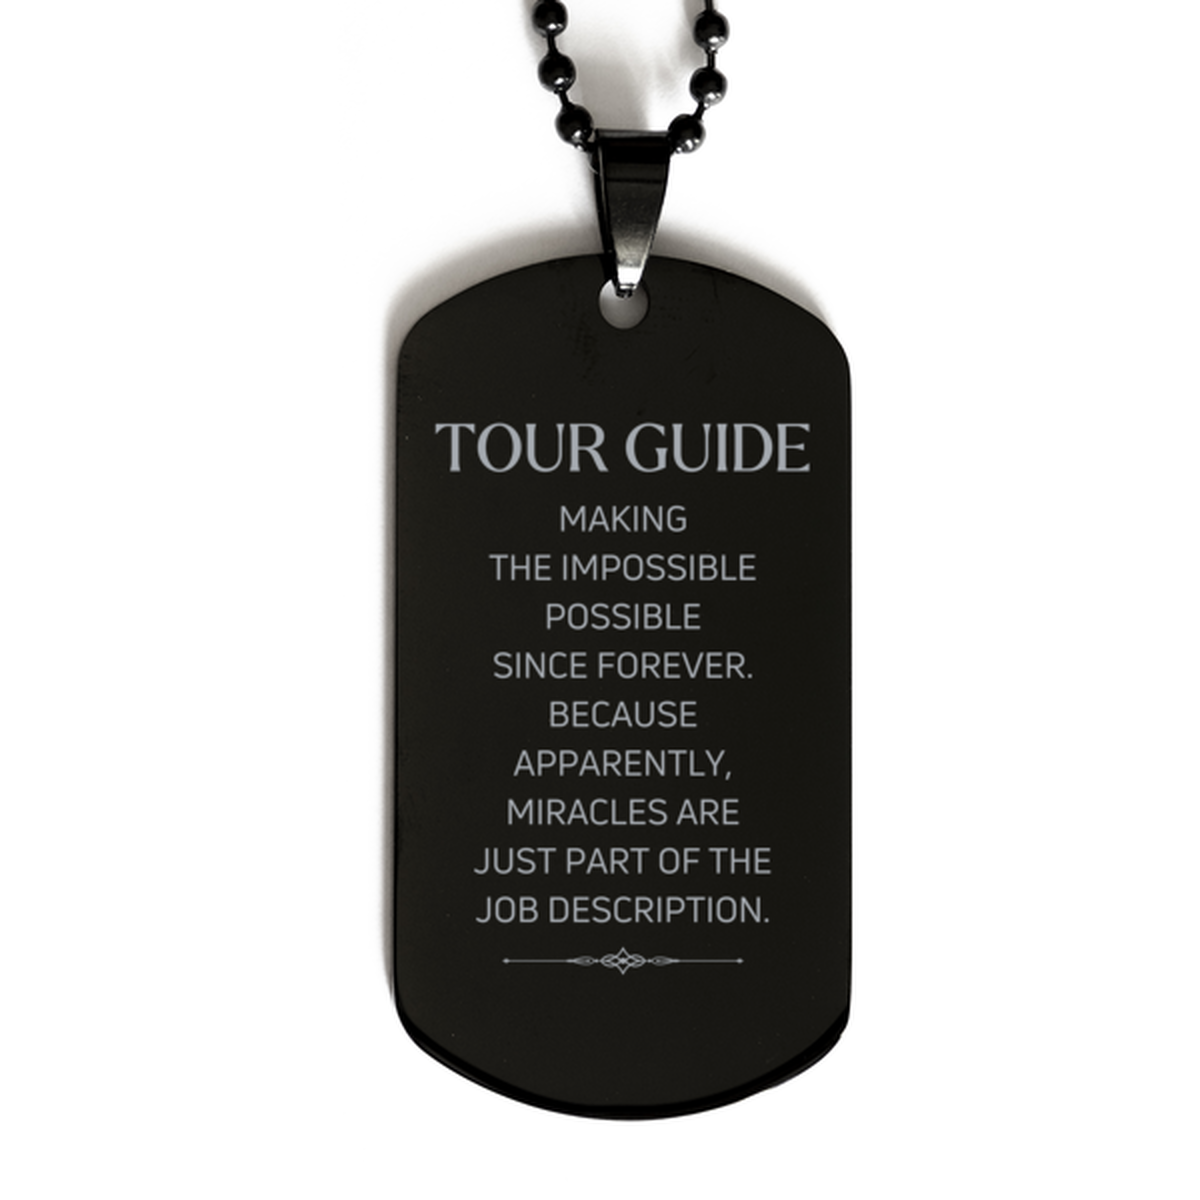 Funny Tour Guide Gifts, Miracles are just part of the job description, Inspirational Birthday Black Dog Tag For Tour Guide, Men, Women, Coworkers, Friends, Boss